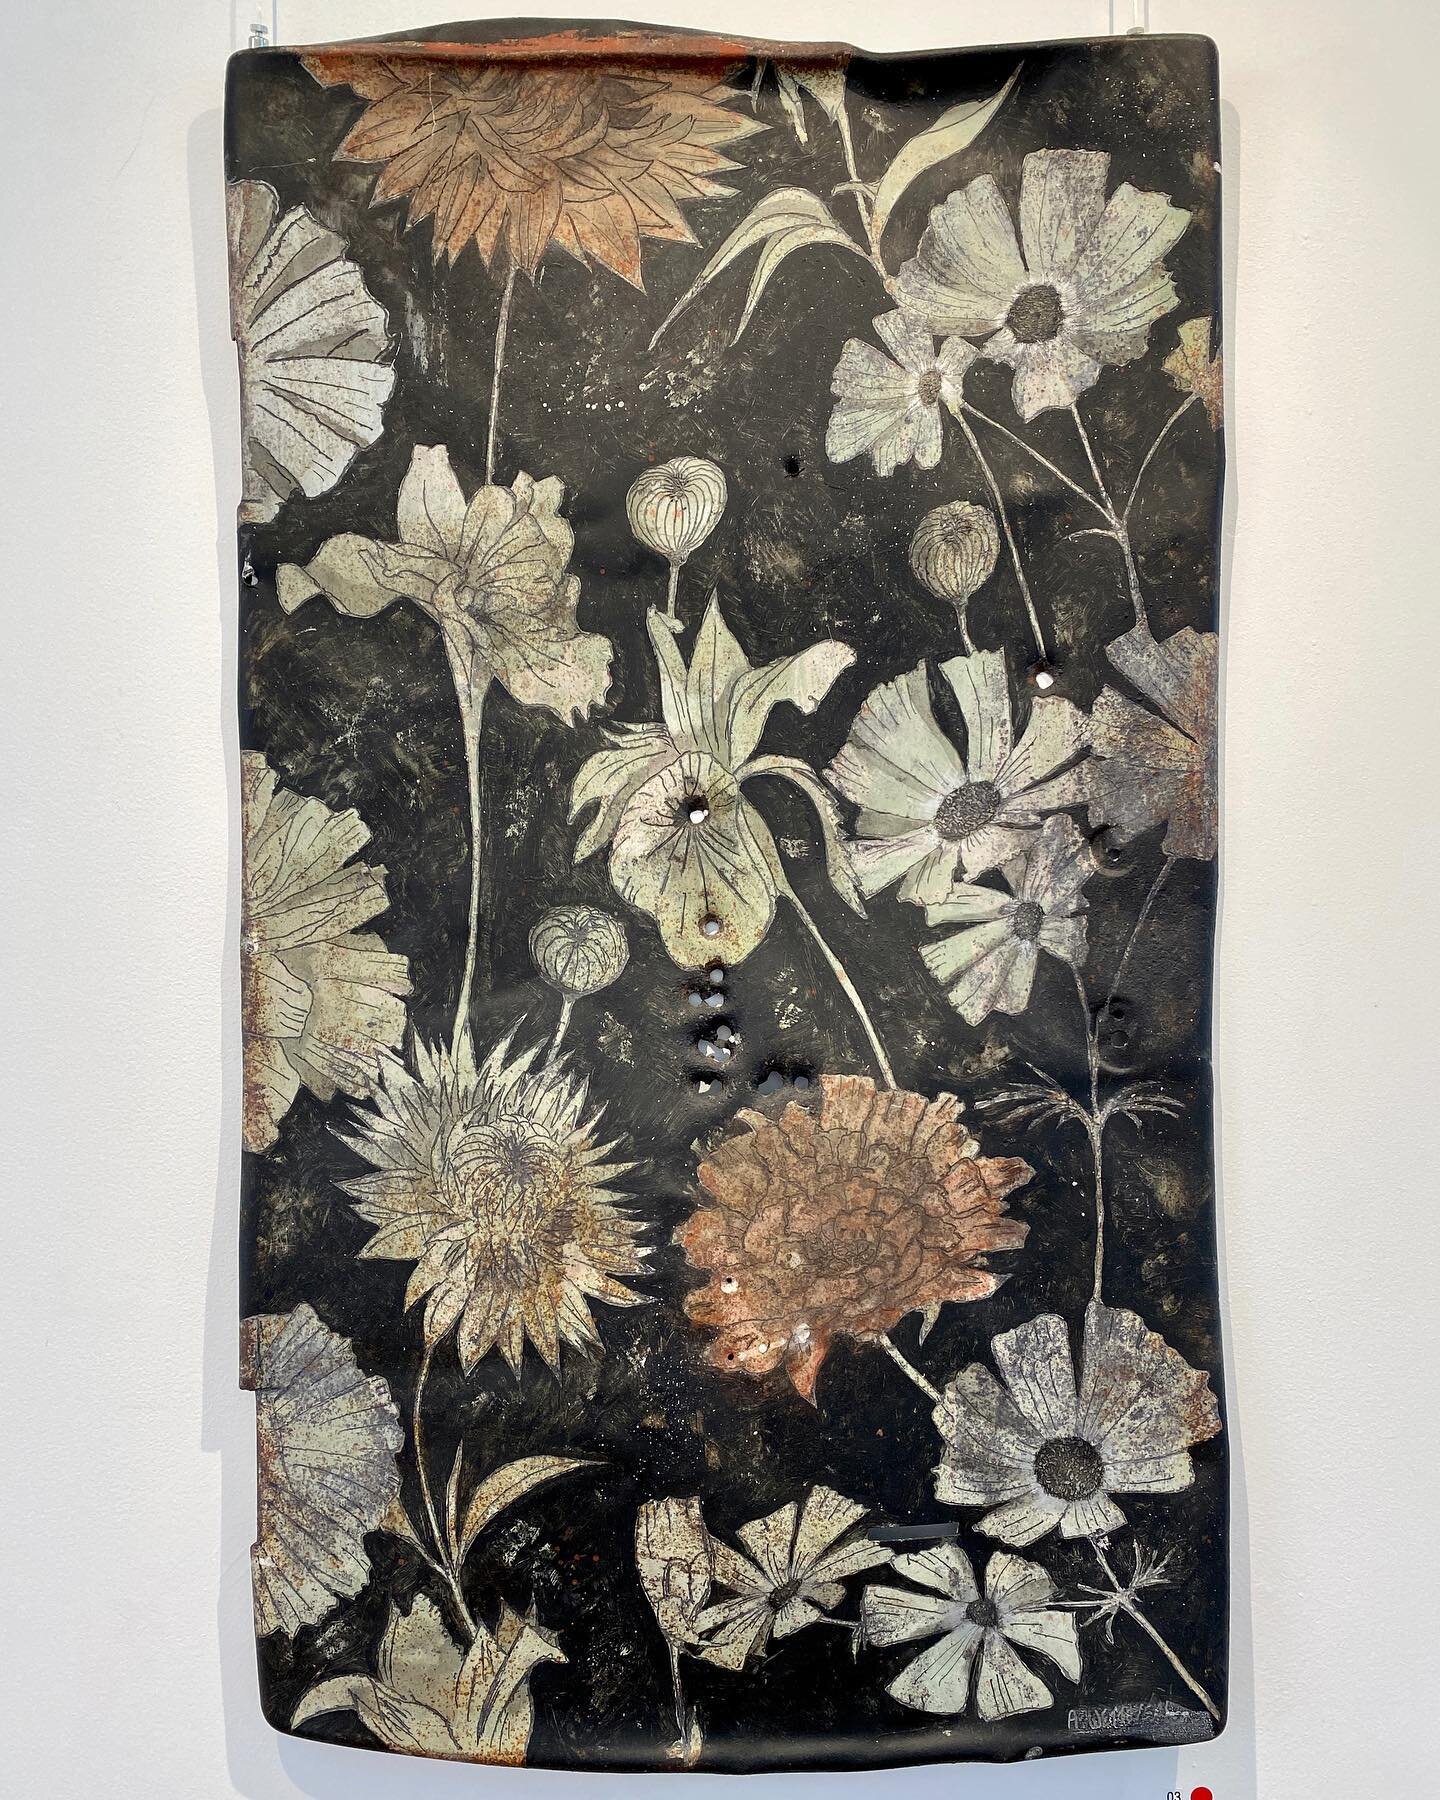 The Flower series

Antony has repurposed rusty old metal sheets - once used by farmers for target practice (if you look closely you can see the bullet holes) - as substrates and inspiration for his artworks &lsquo;Wallpaper&rsquo;, &lsquo;Flannel Flo